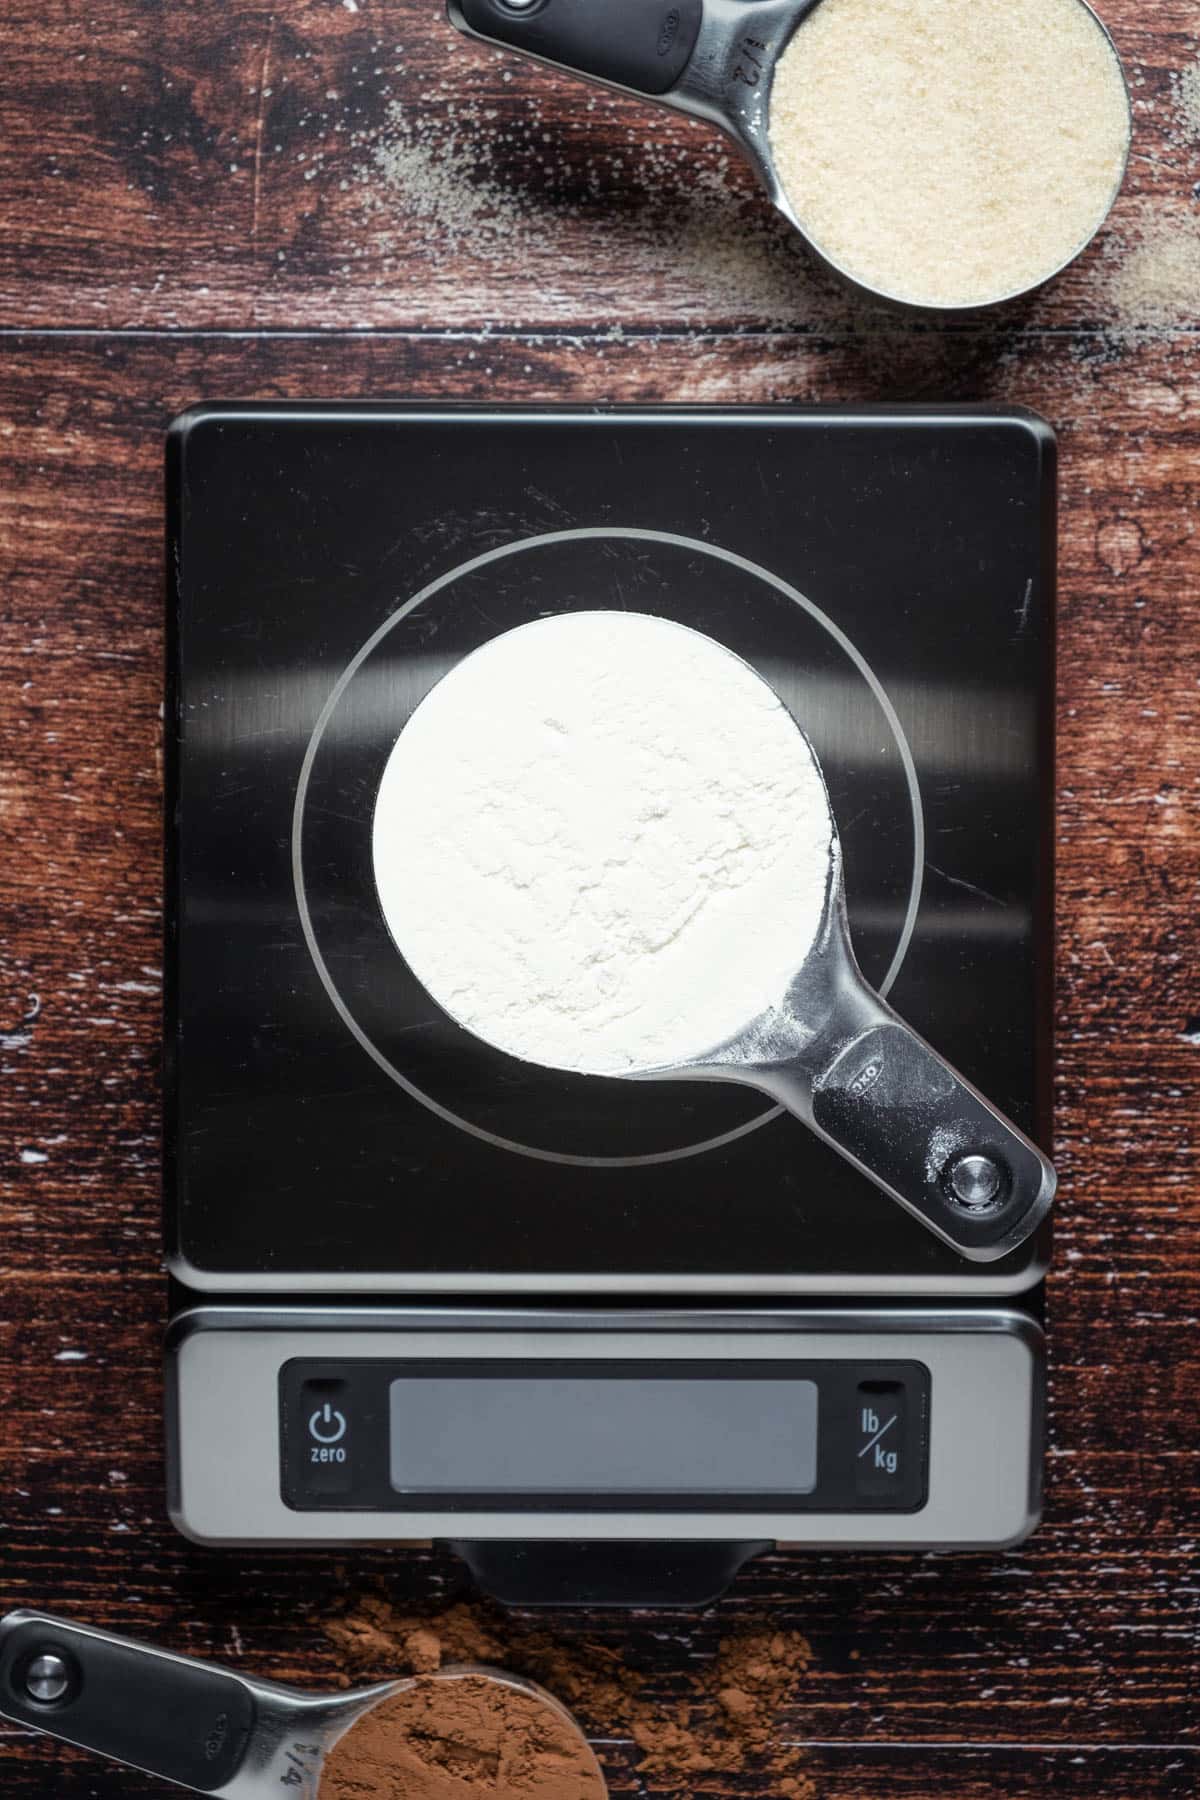 Level cup of flour on a food scale.